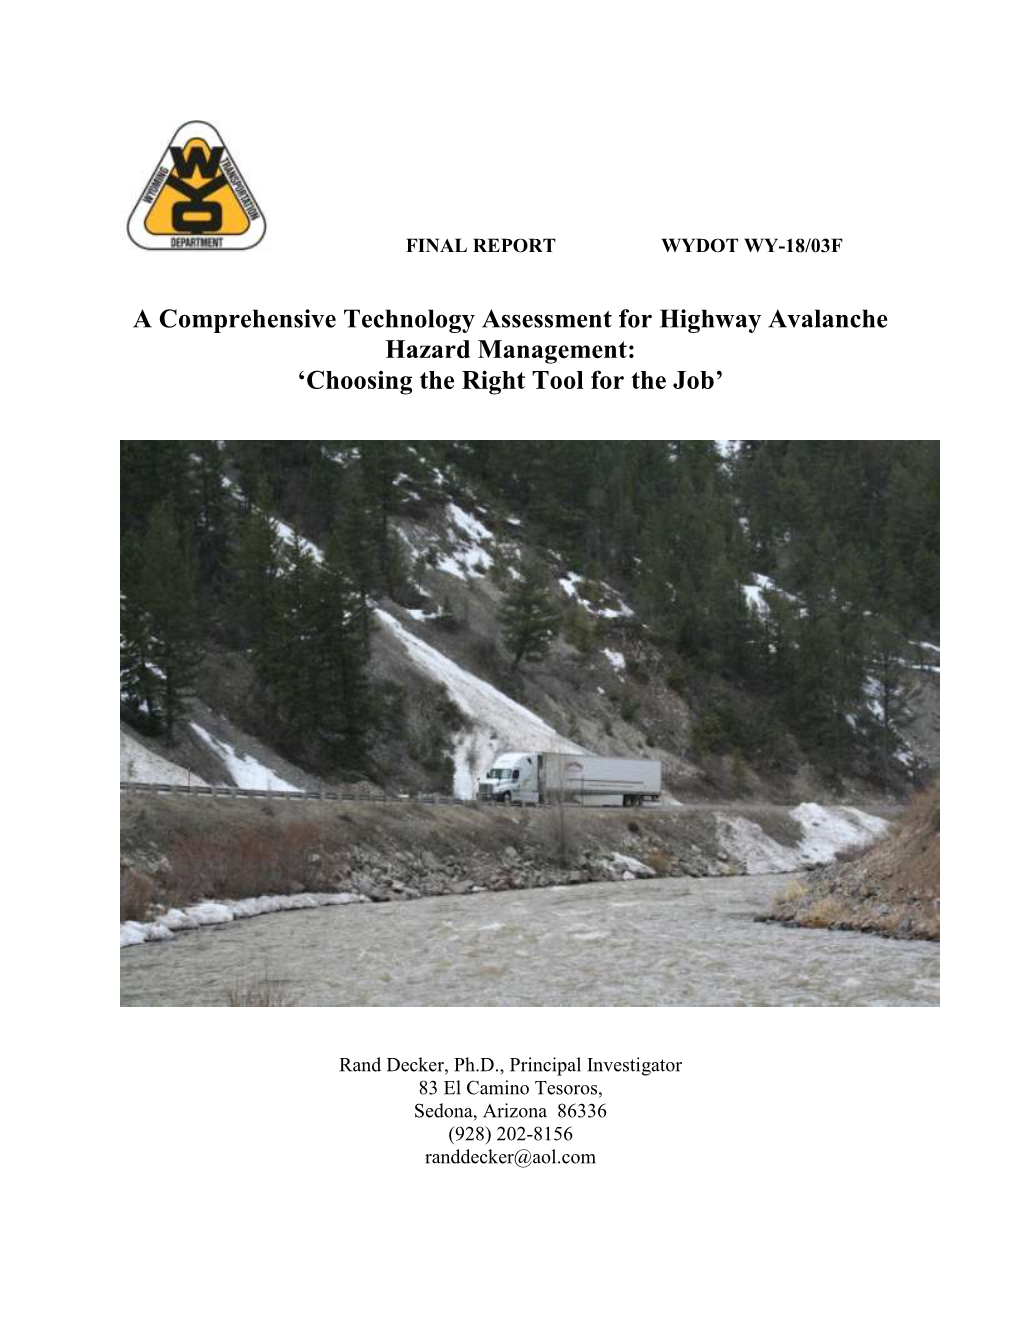 A Comprehensive Technology Assessment for Highway Avalanche Hazard Management: ‘Choosing the Right Tool for the Job’